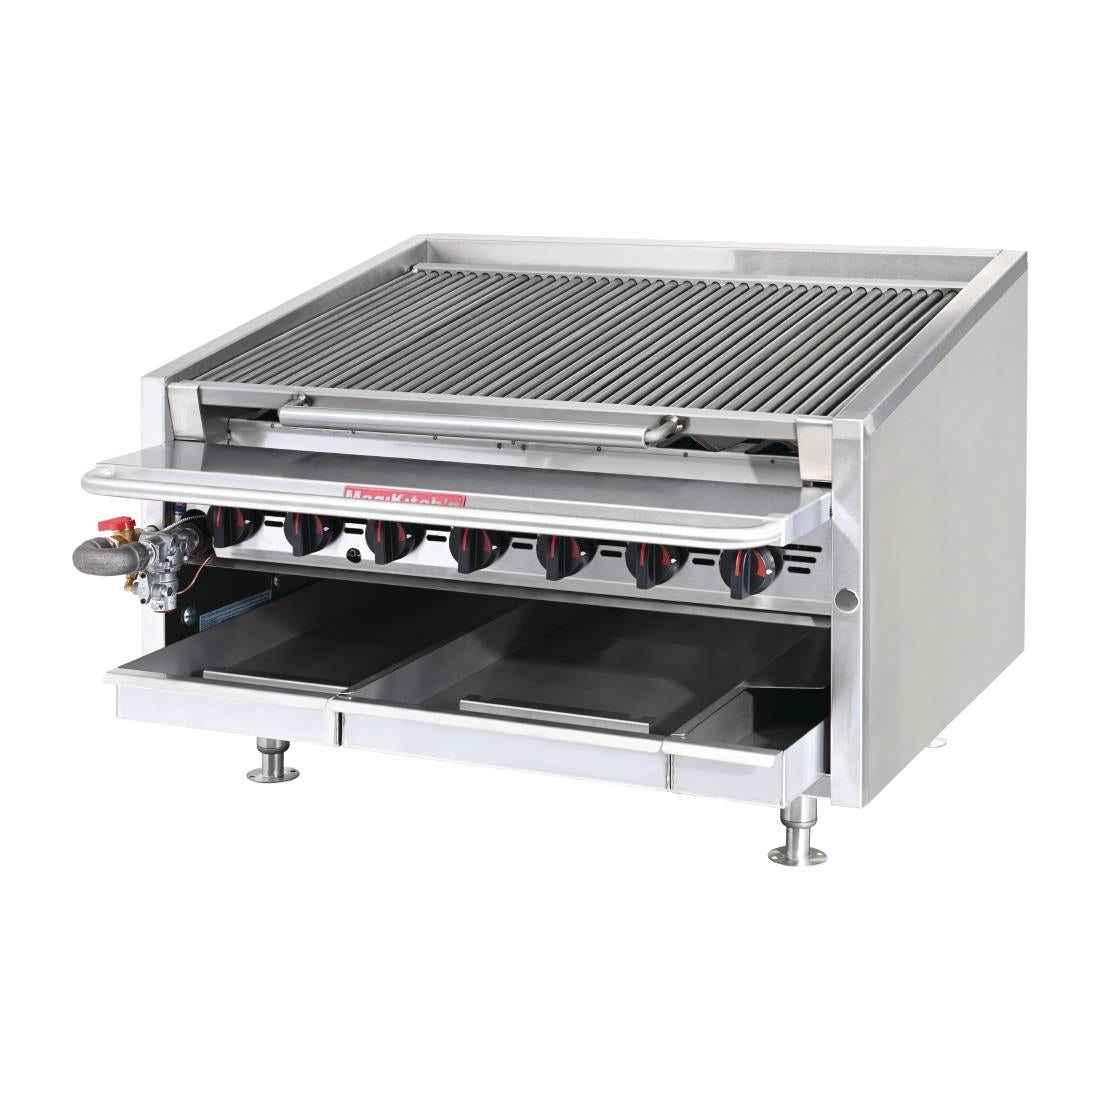 FP871 MagiKitch'n Gas Chargrill RMB636 JD Catering Equipment Solutions Ltd